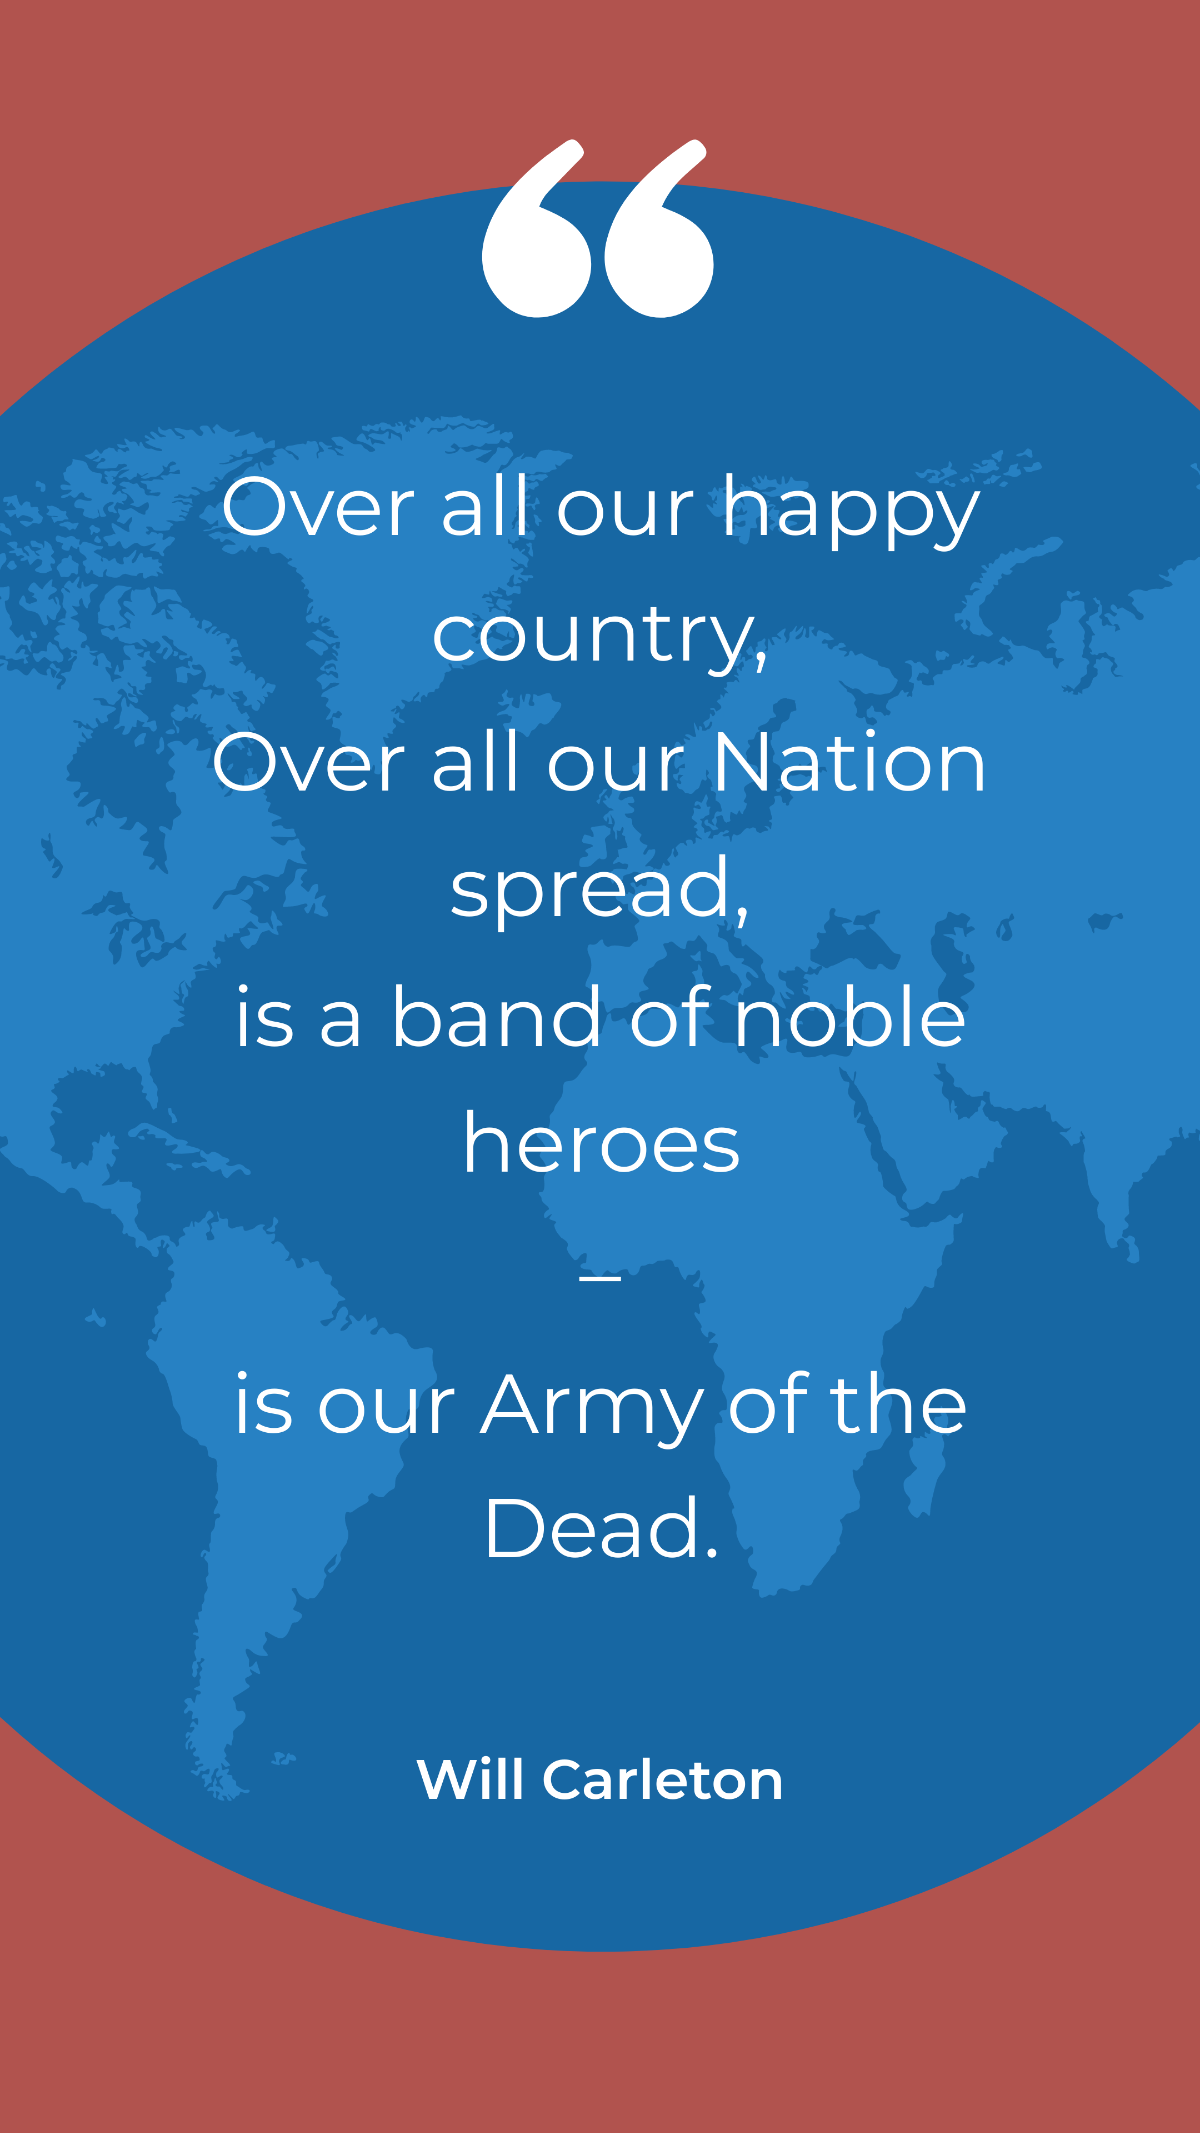 Will Carleton - Over all our happy country over all our Nation spread, is a band of noble heroes–is our Army of the Dead. Template